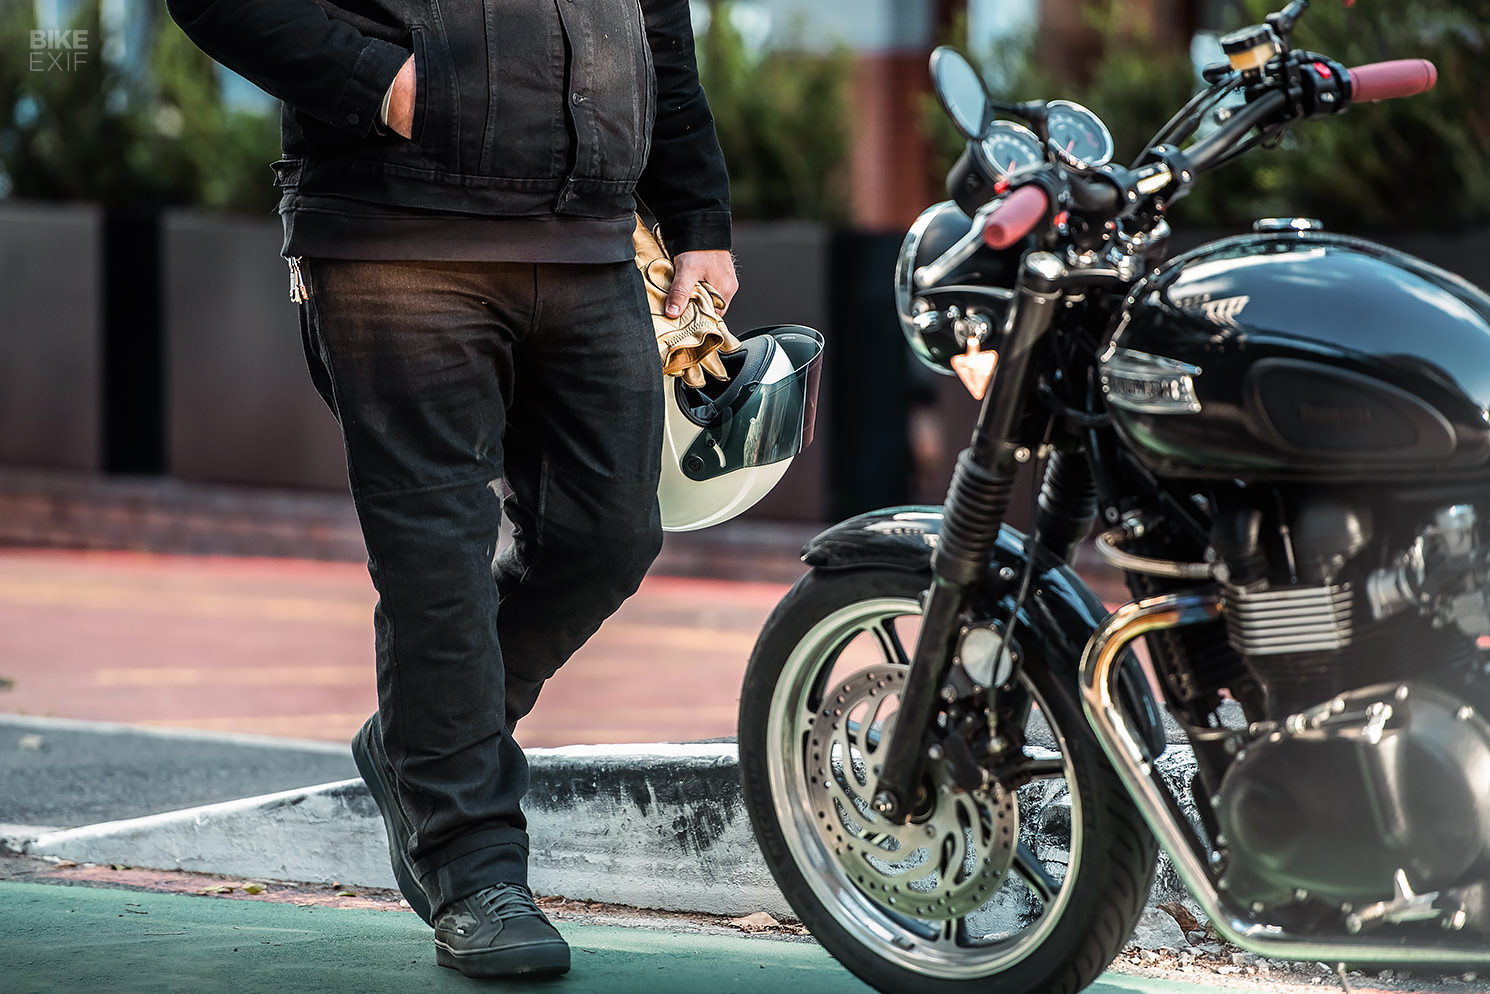 Road Tested: The new Saint Engineered armored motorcycle jeans